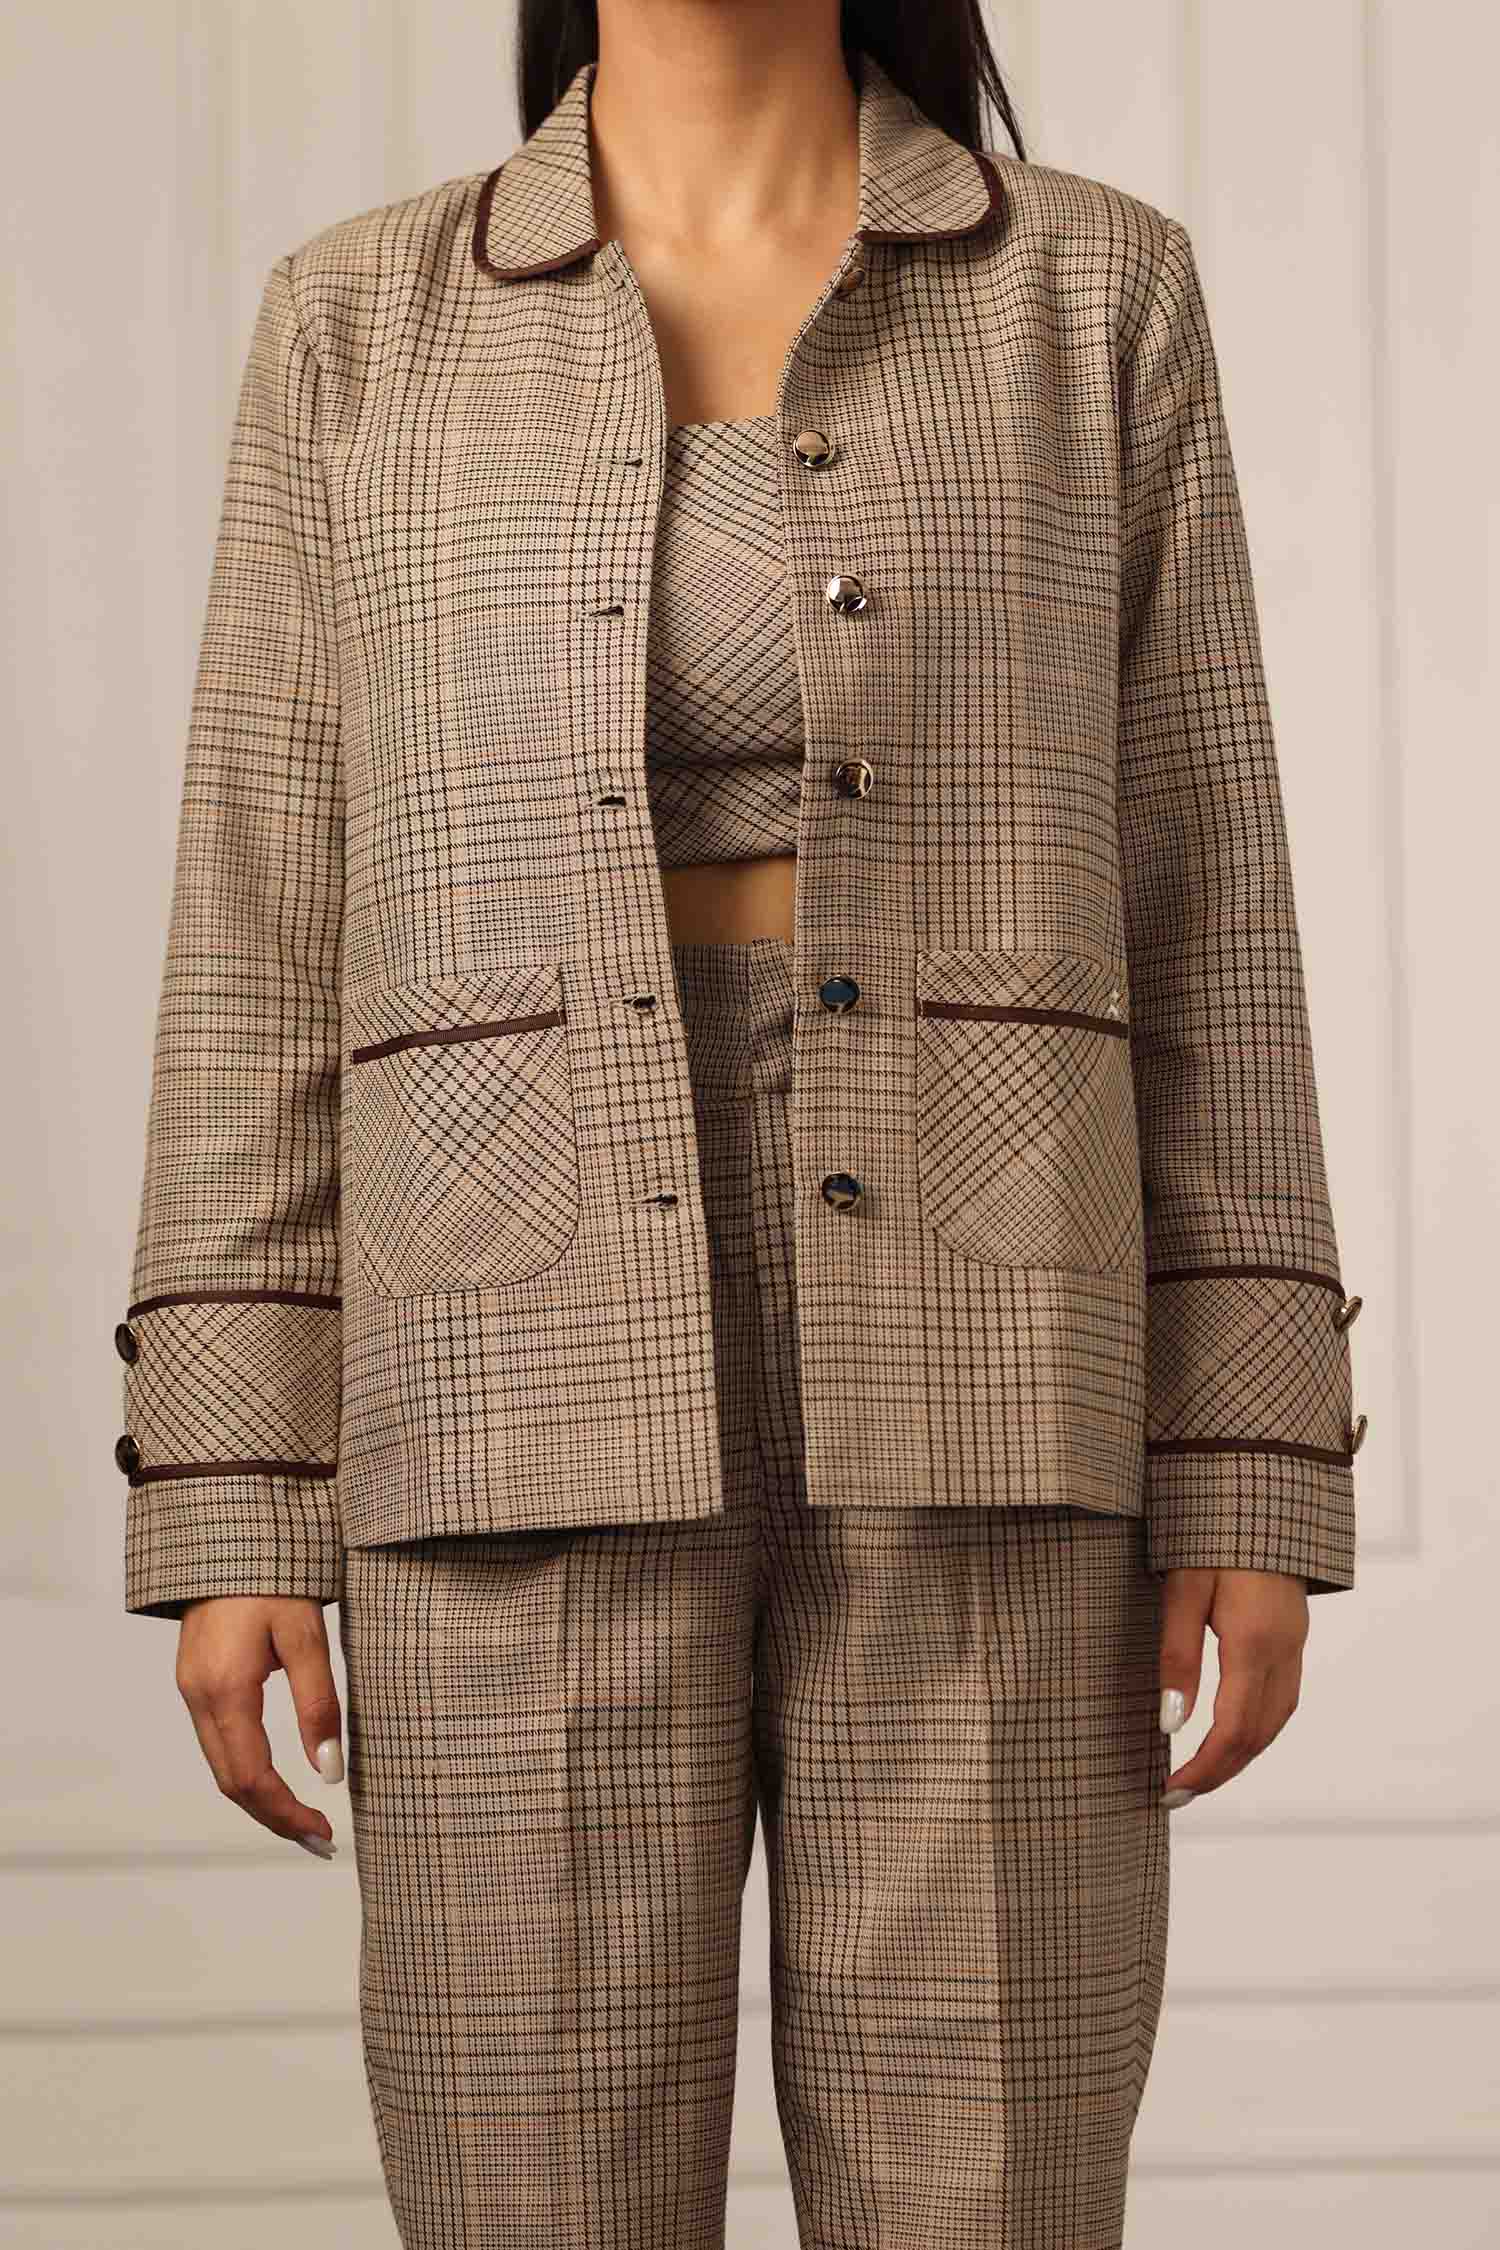 Wheat Tan Box Blazer with Crop top and High-waist trousers